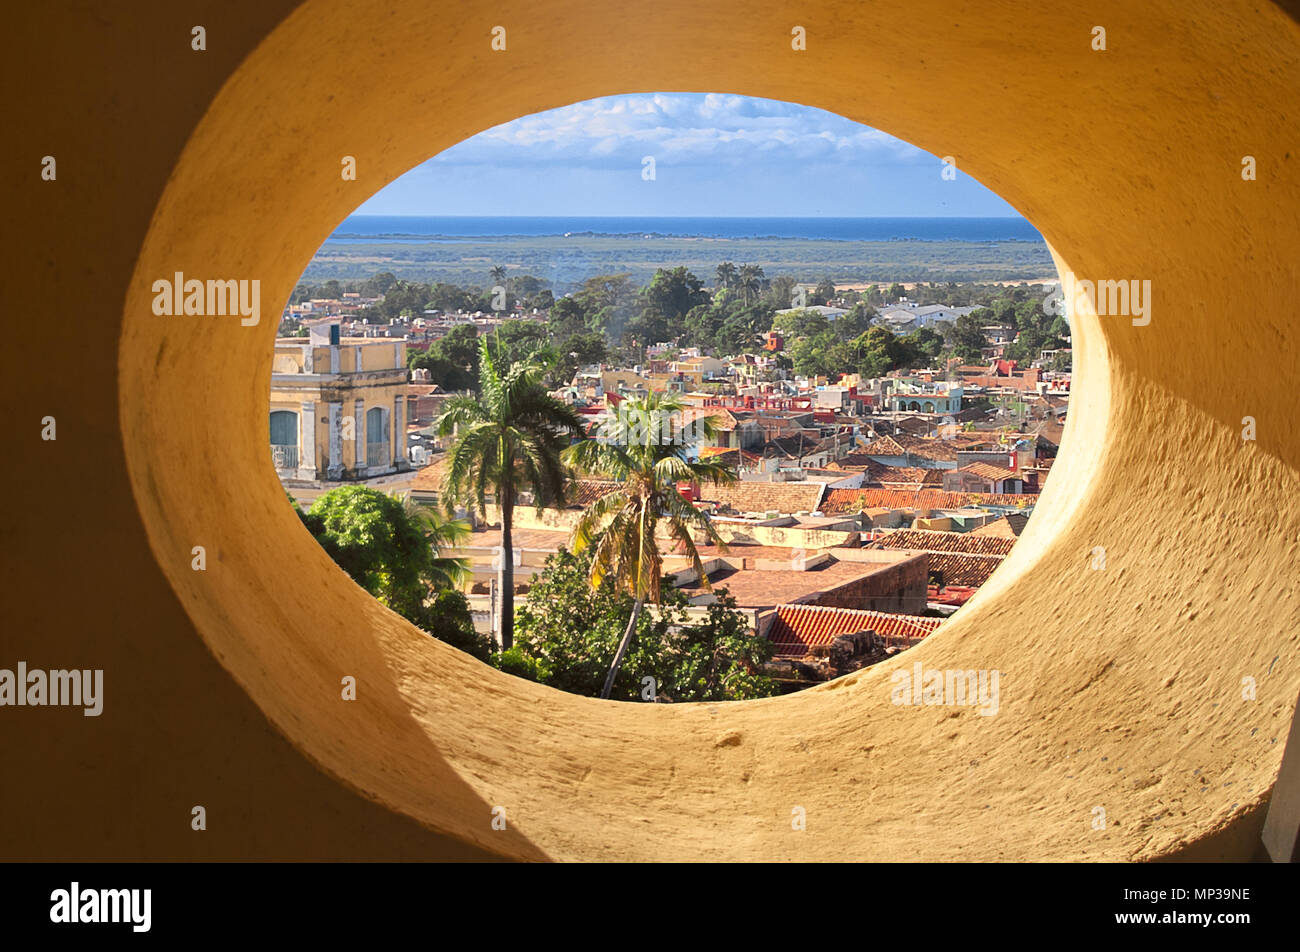 A view of the old city through the round window of the tower. Stock Photo